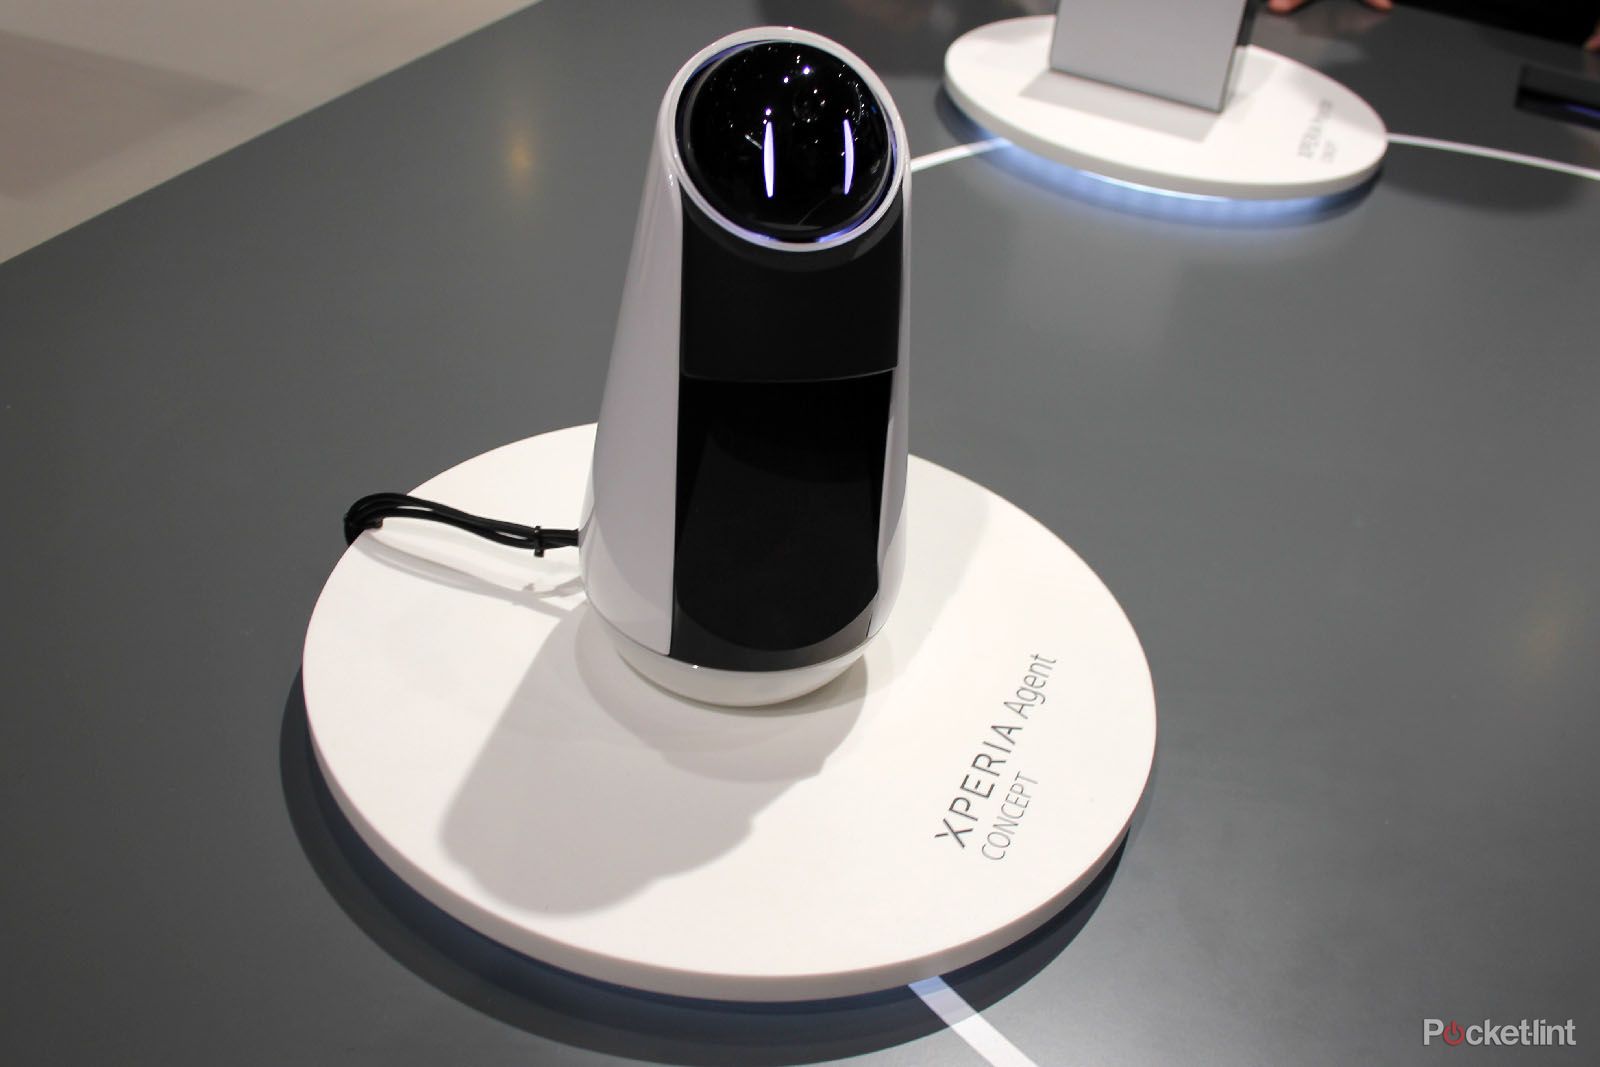 sony xperia eye projector agent concept visions of a connected future image 3